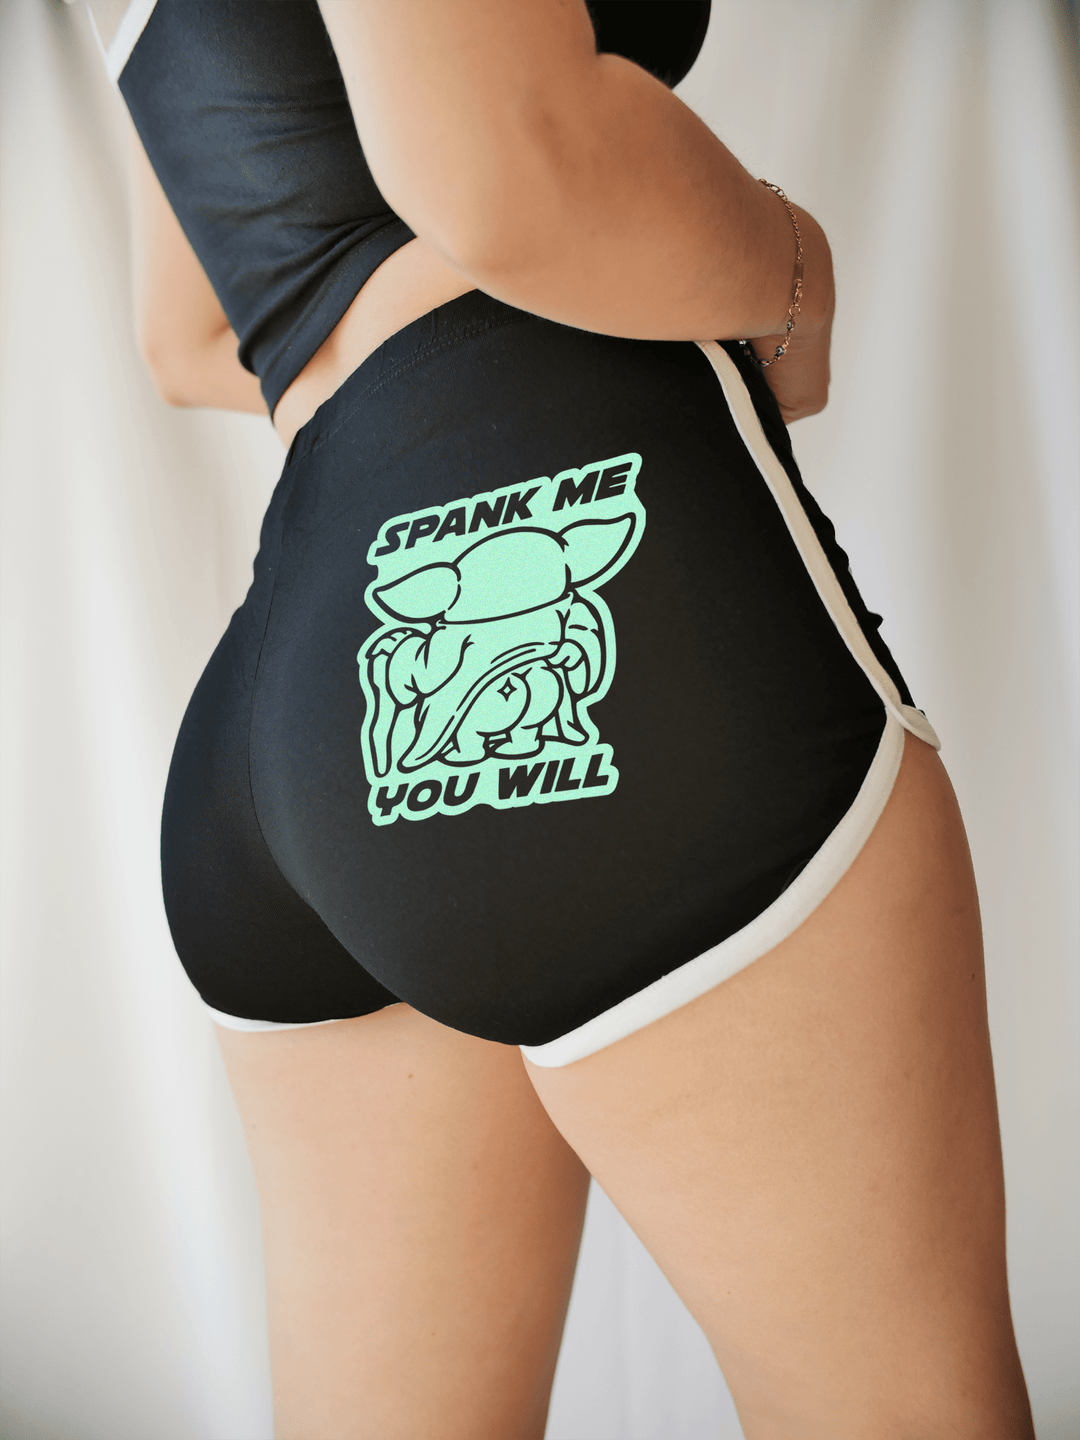 PixelThat Dolphin Shorts Black / S Spank Me You Will Dolphin Shorts